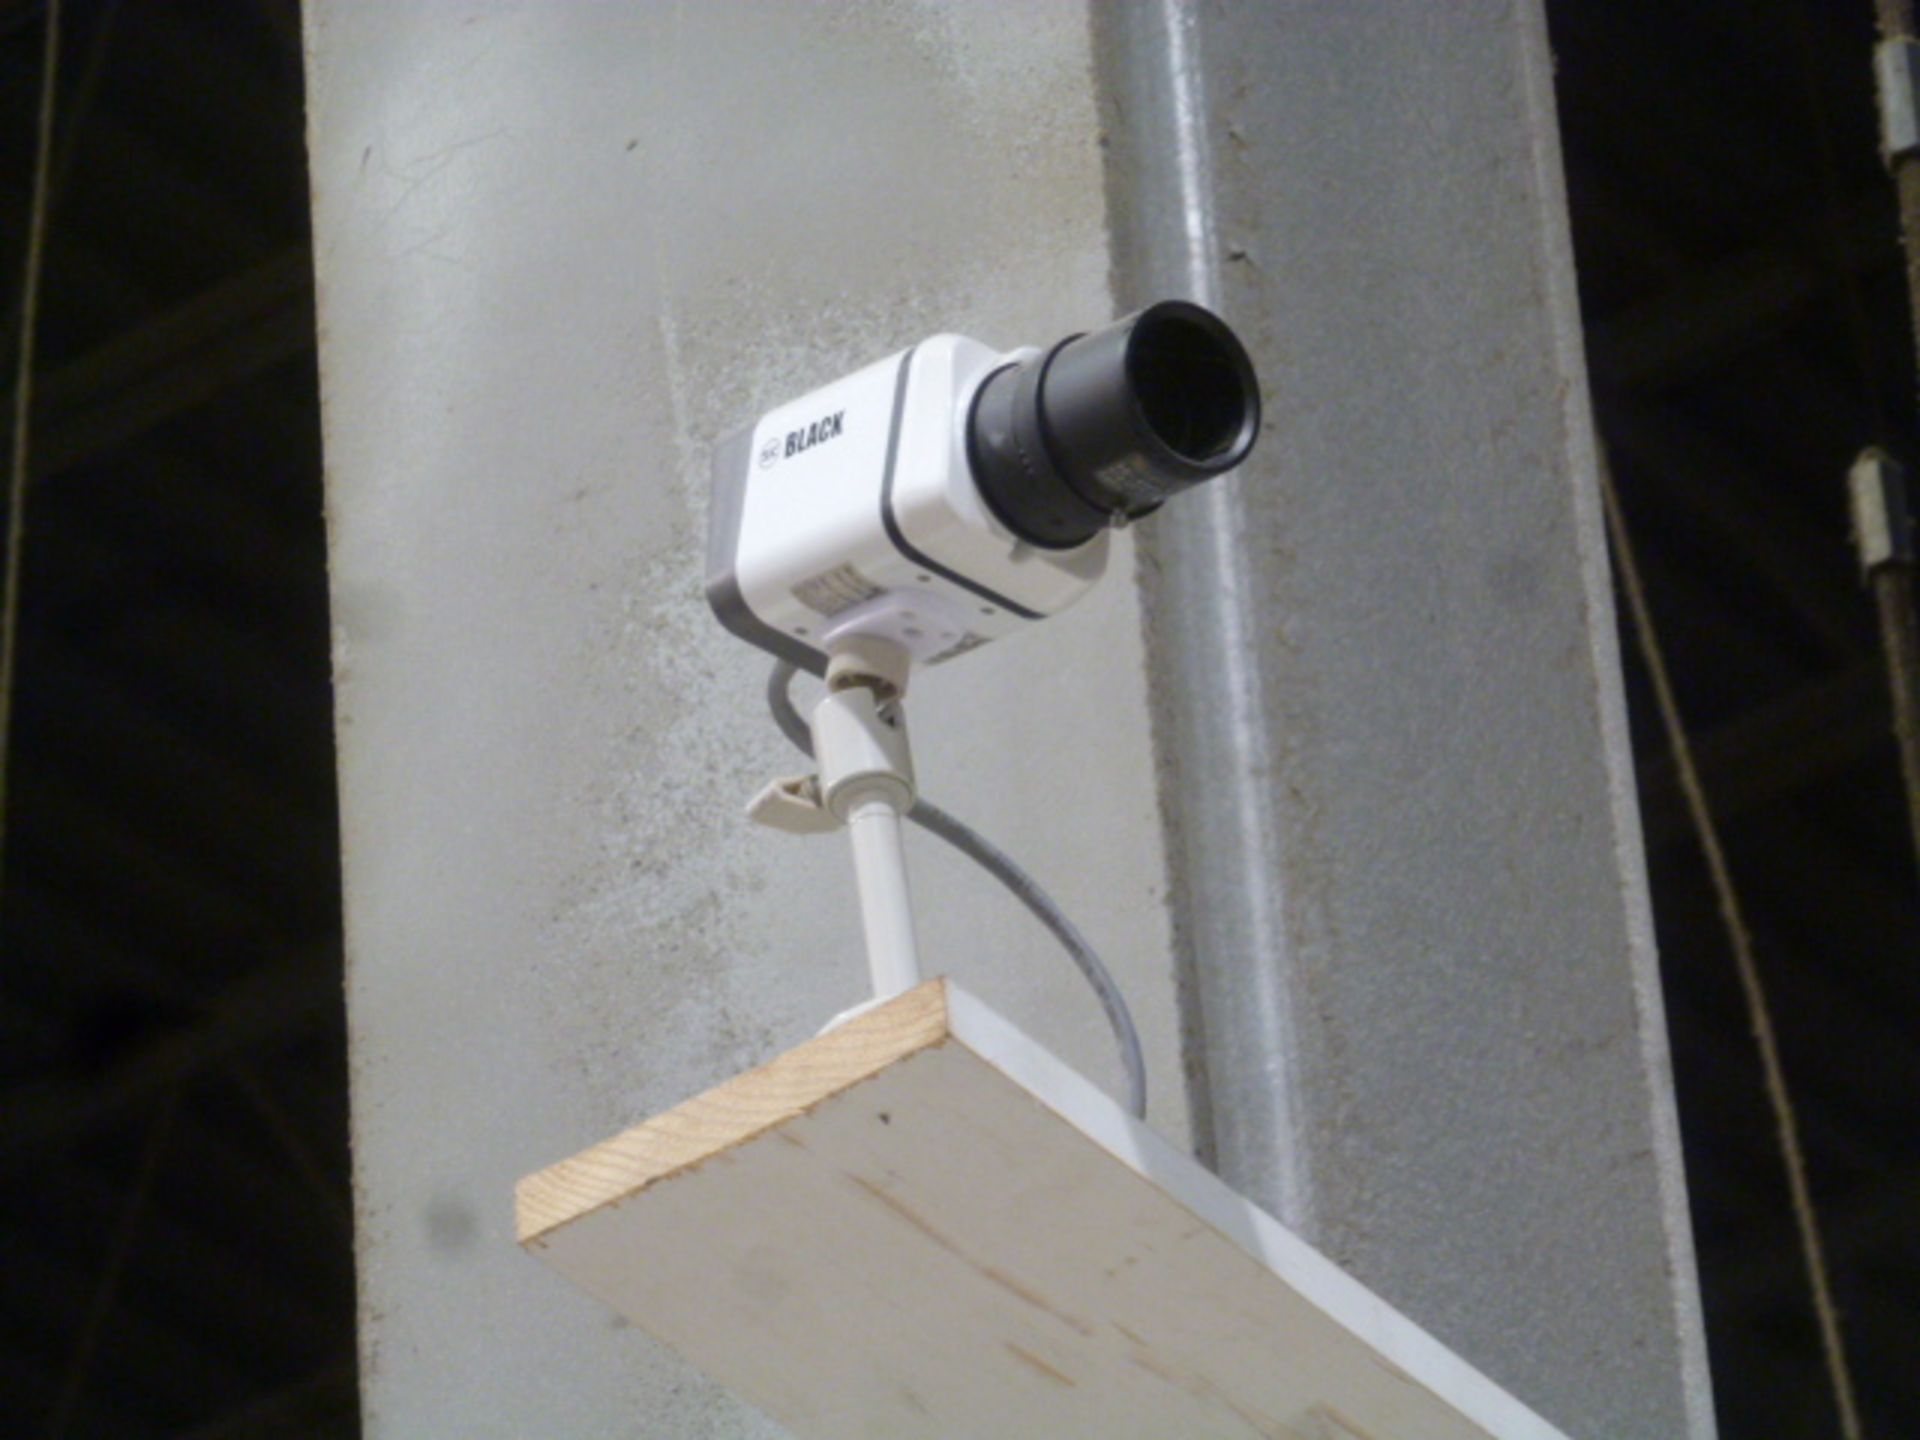 Security Cameras (Lot) - Image 2 of 3